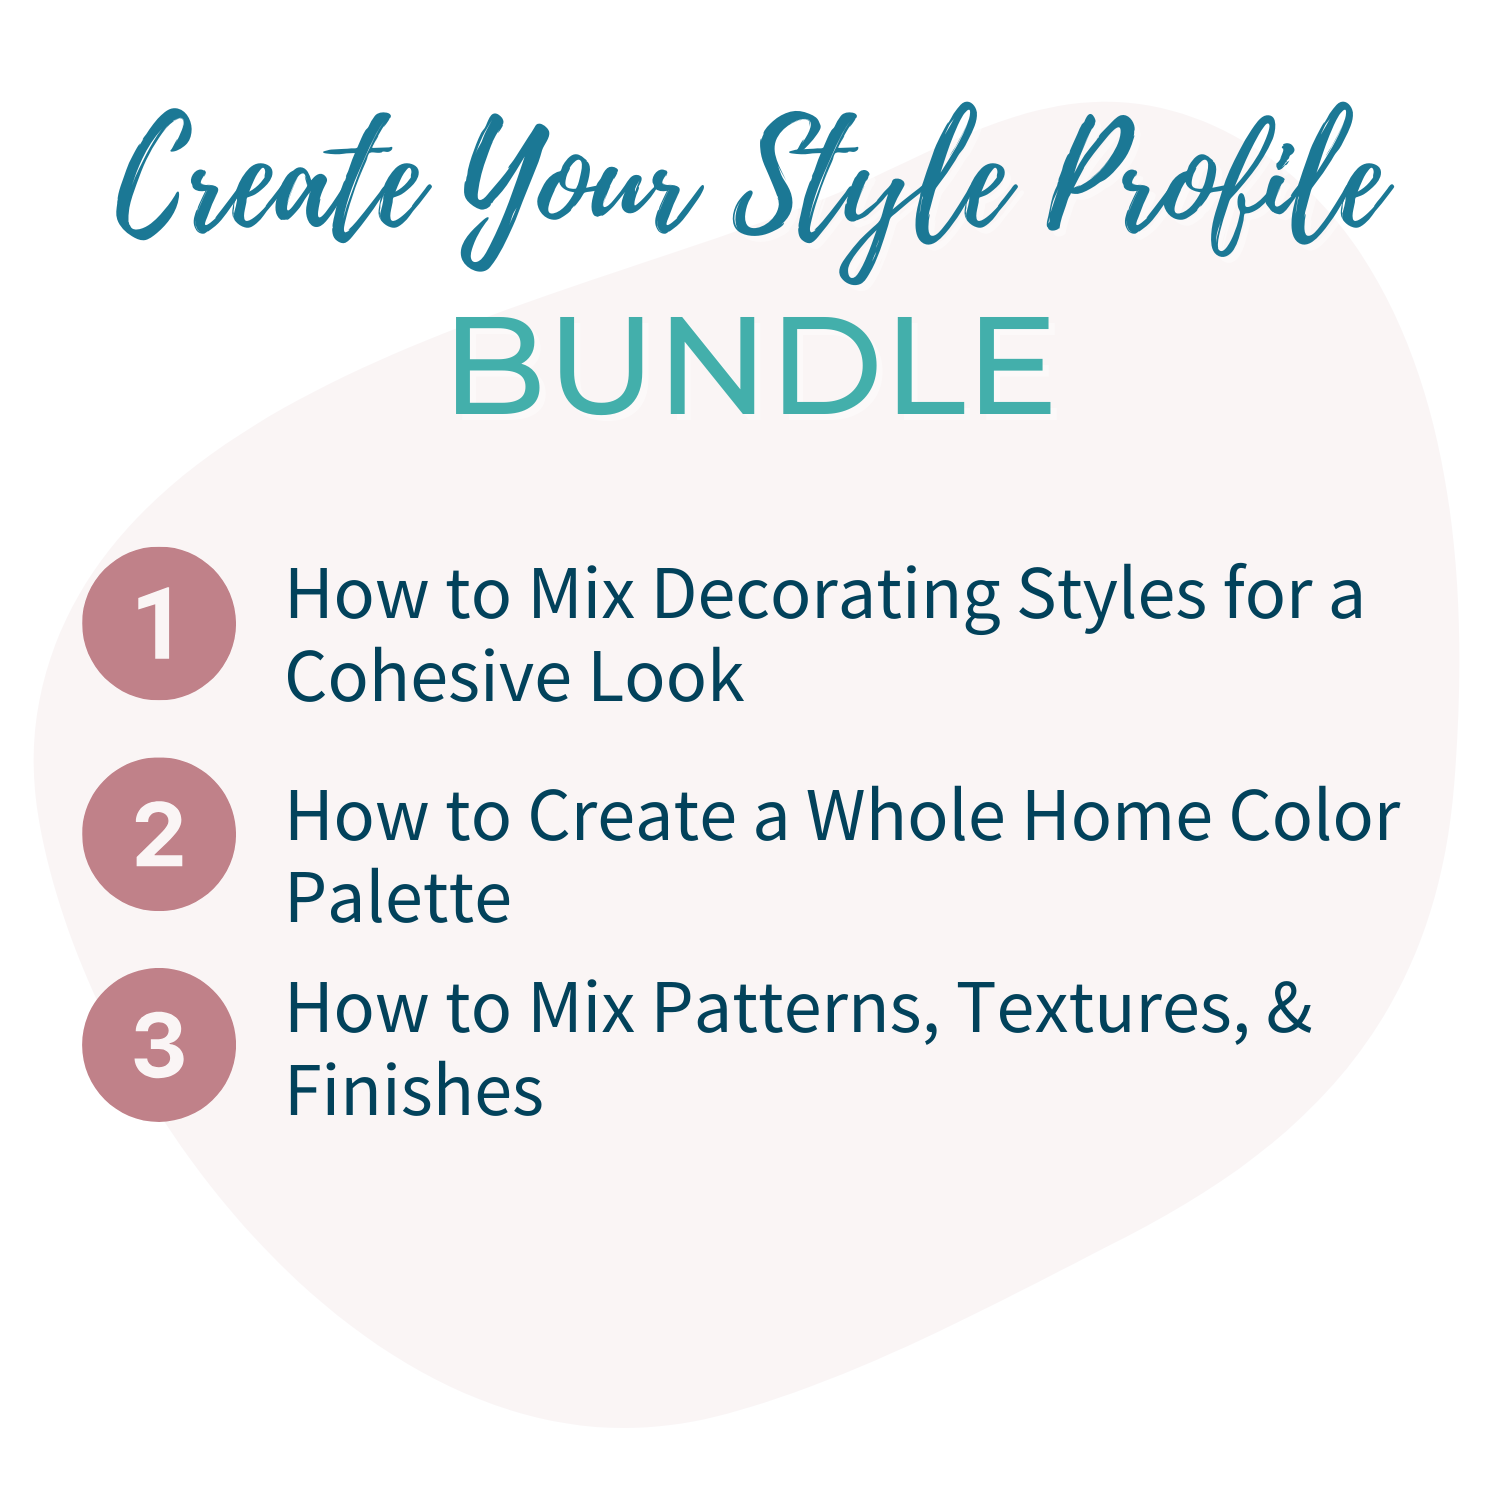 Create your My Homier Home style profile workshop bundle. This comprehensive package includes personalized workshops and expert guidance to help you make confident decorating decisions.